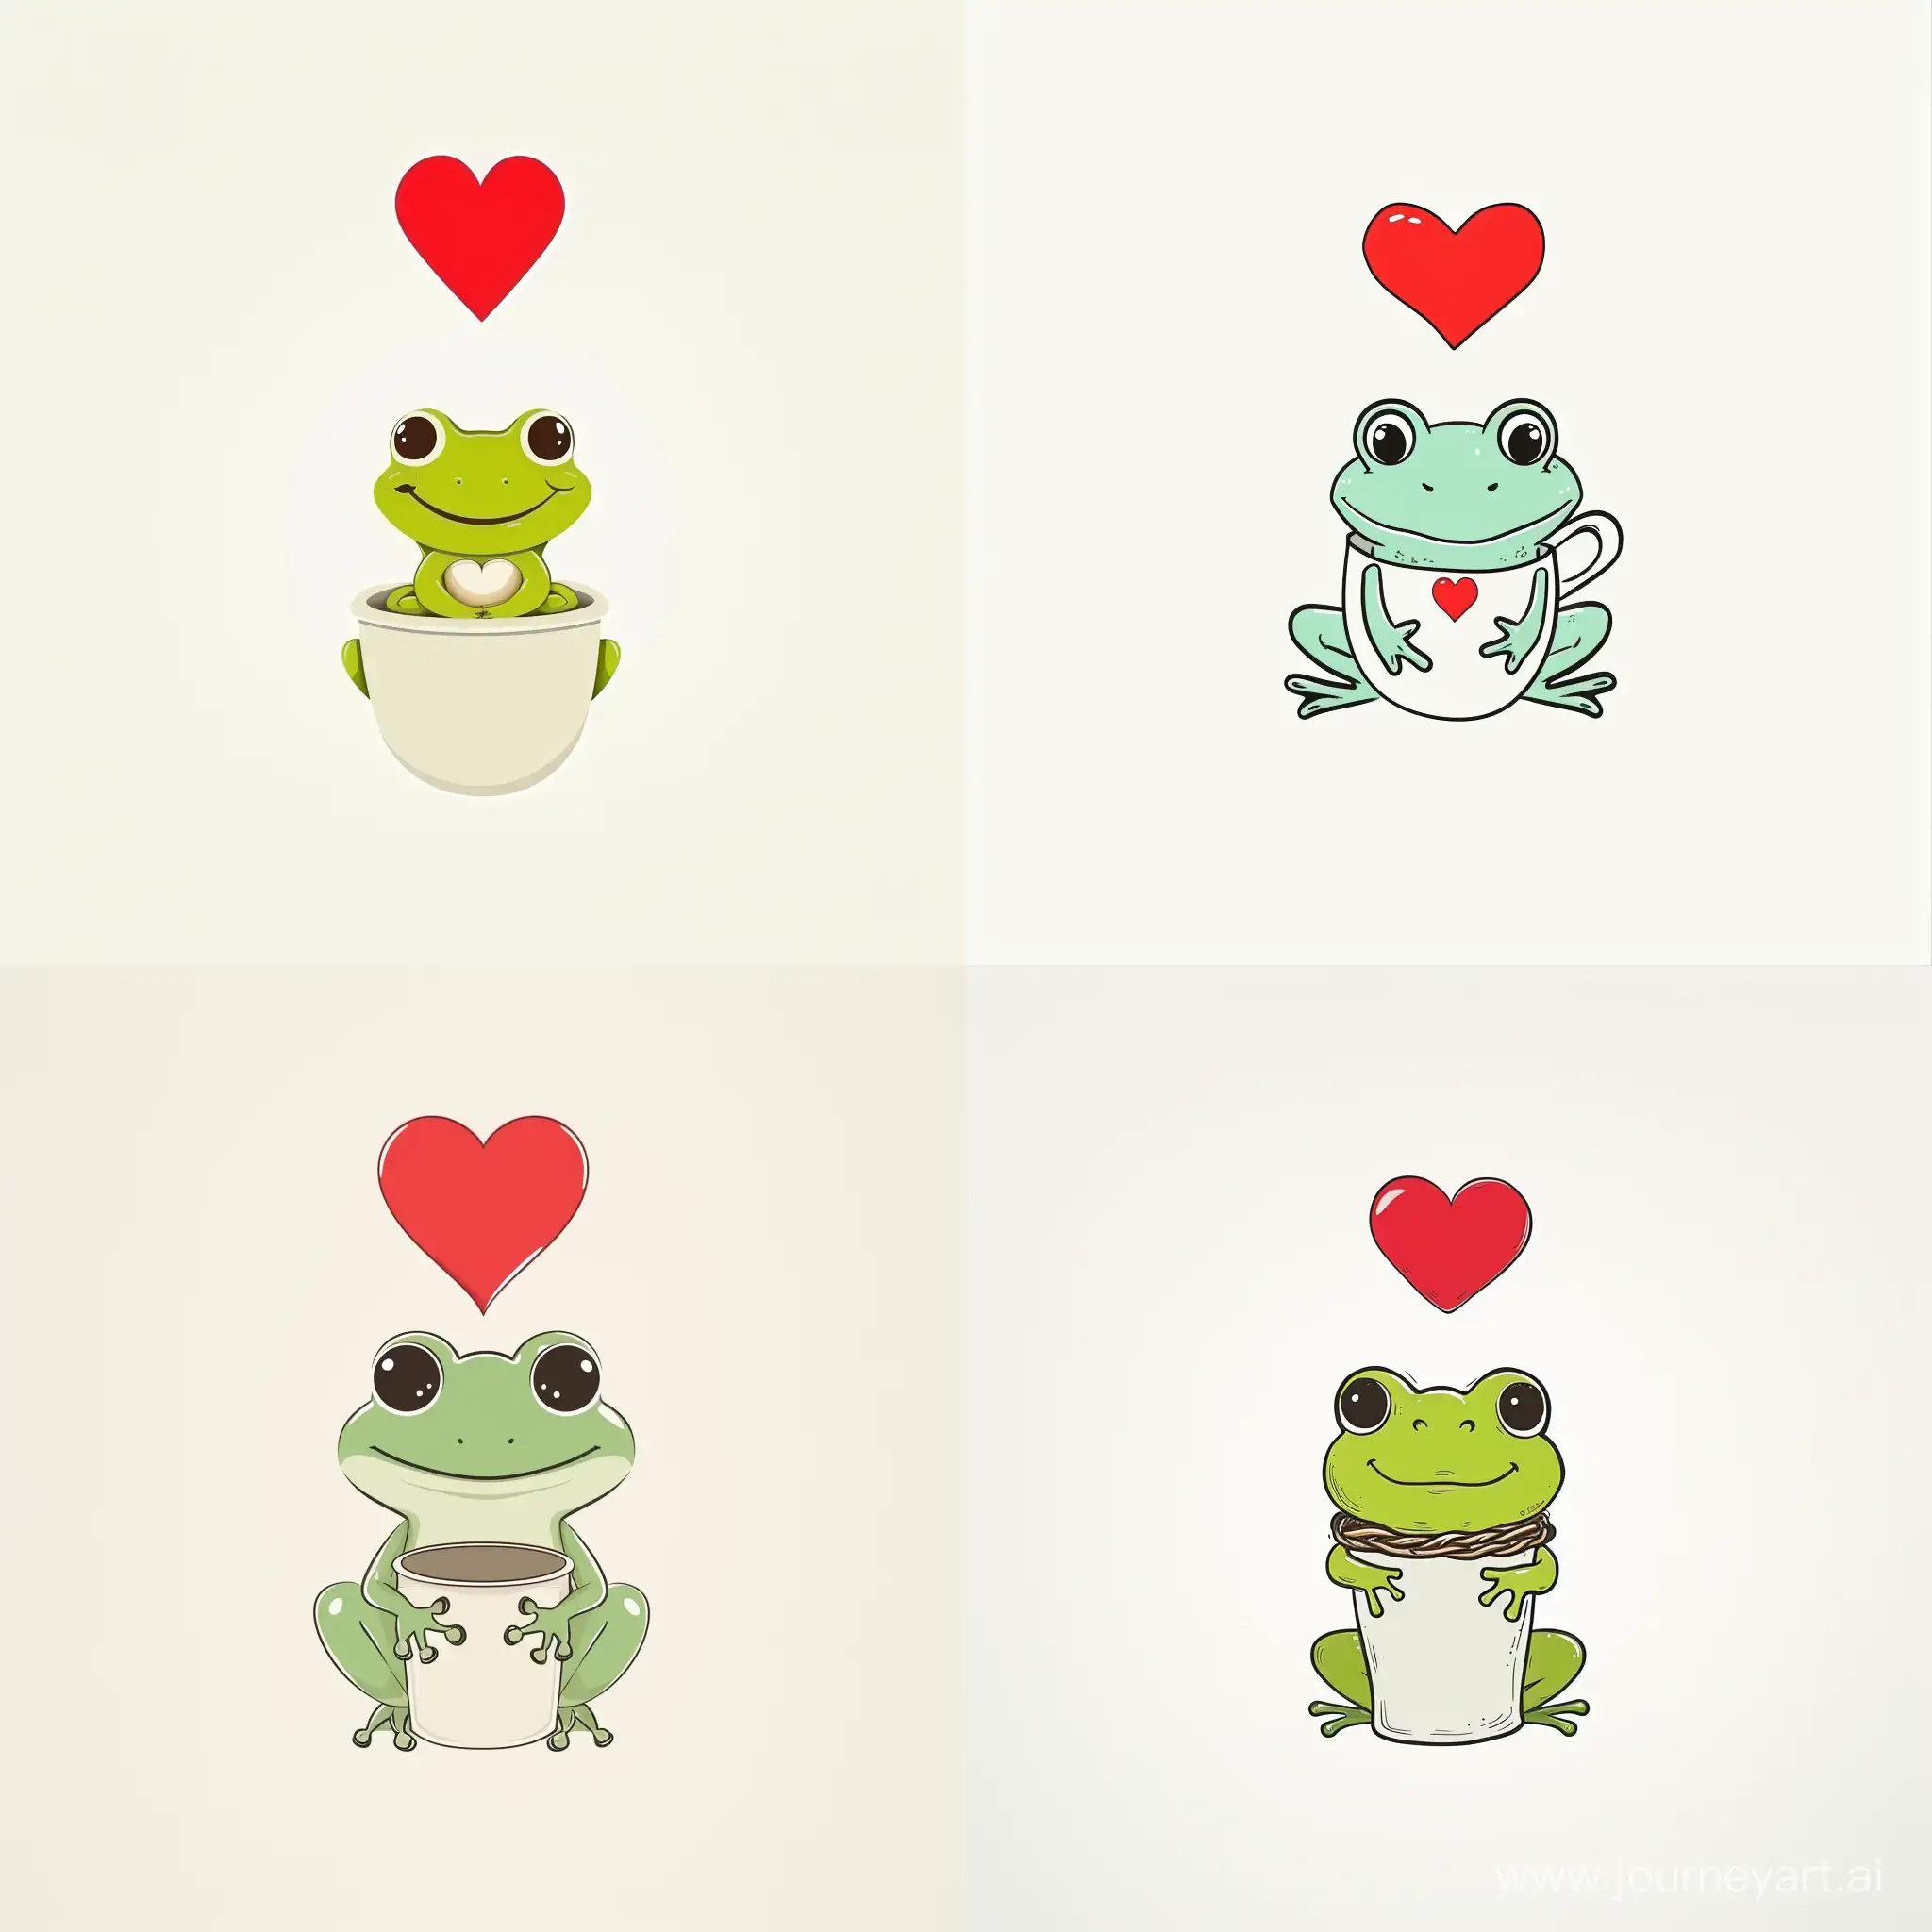 Cute minimalistic cartoon green frog sitting in a cup, a red heart above her head, all on a white background